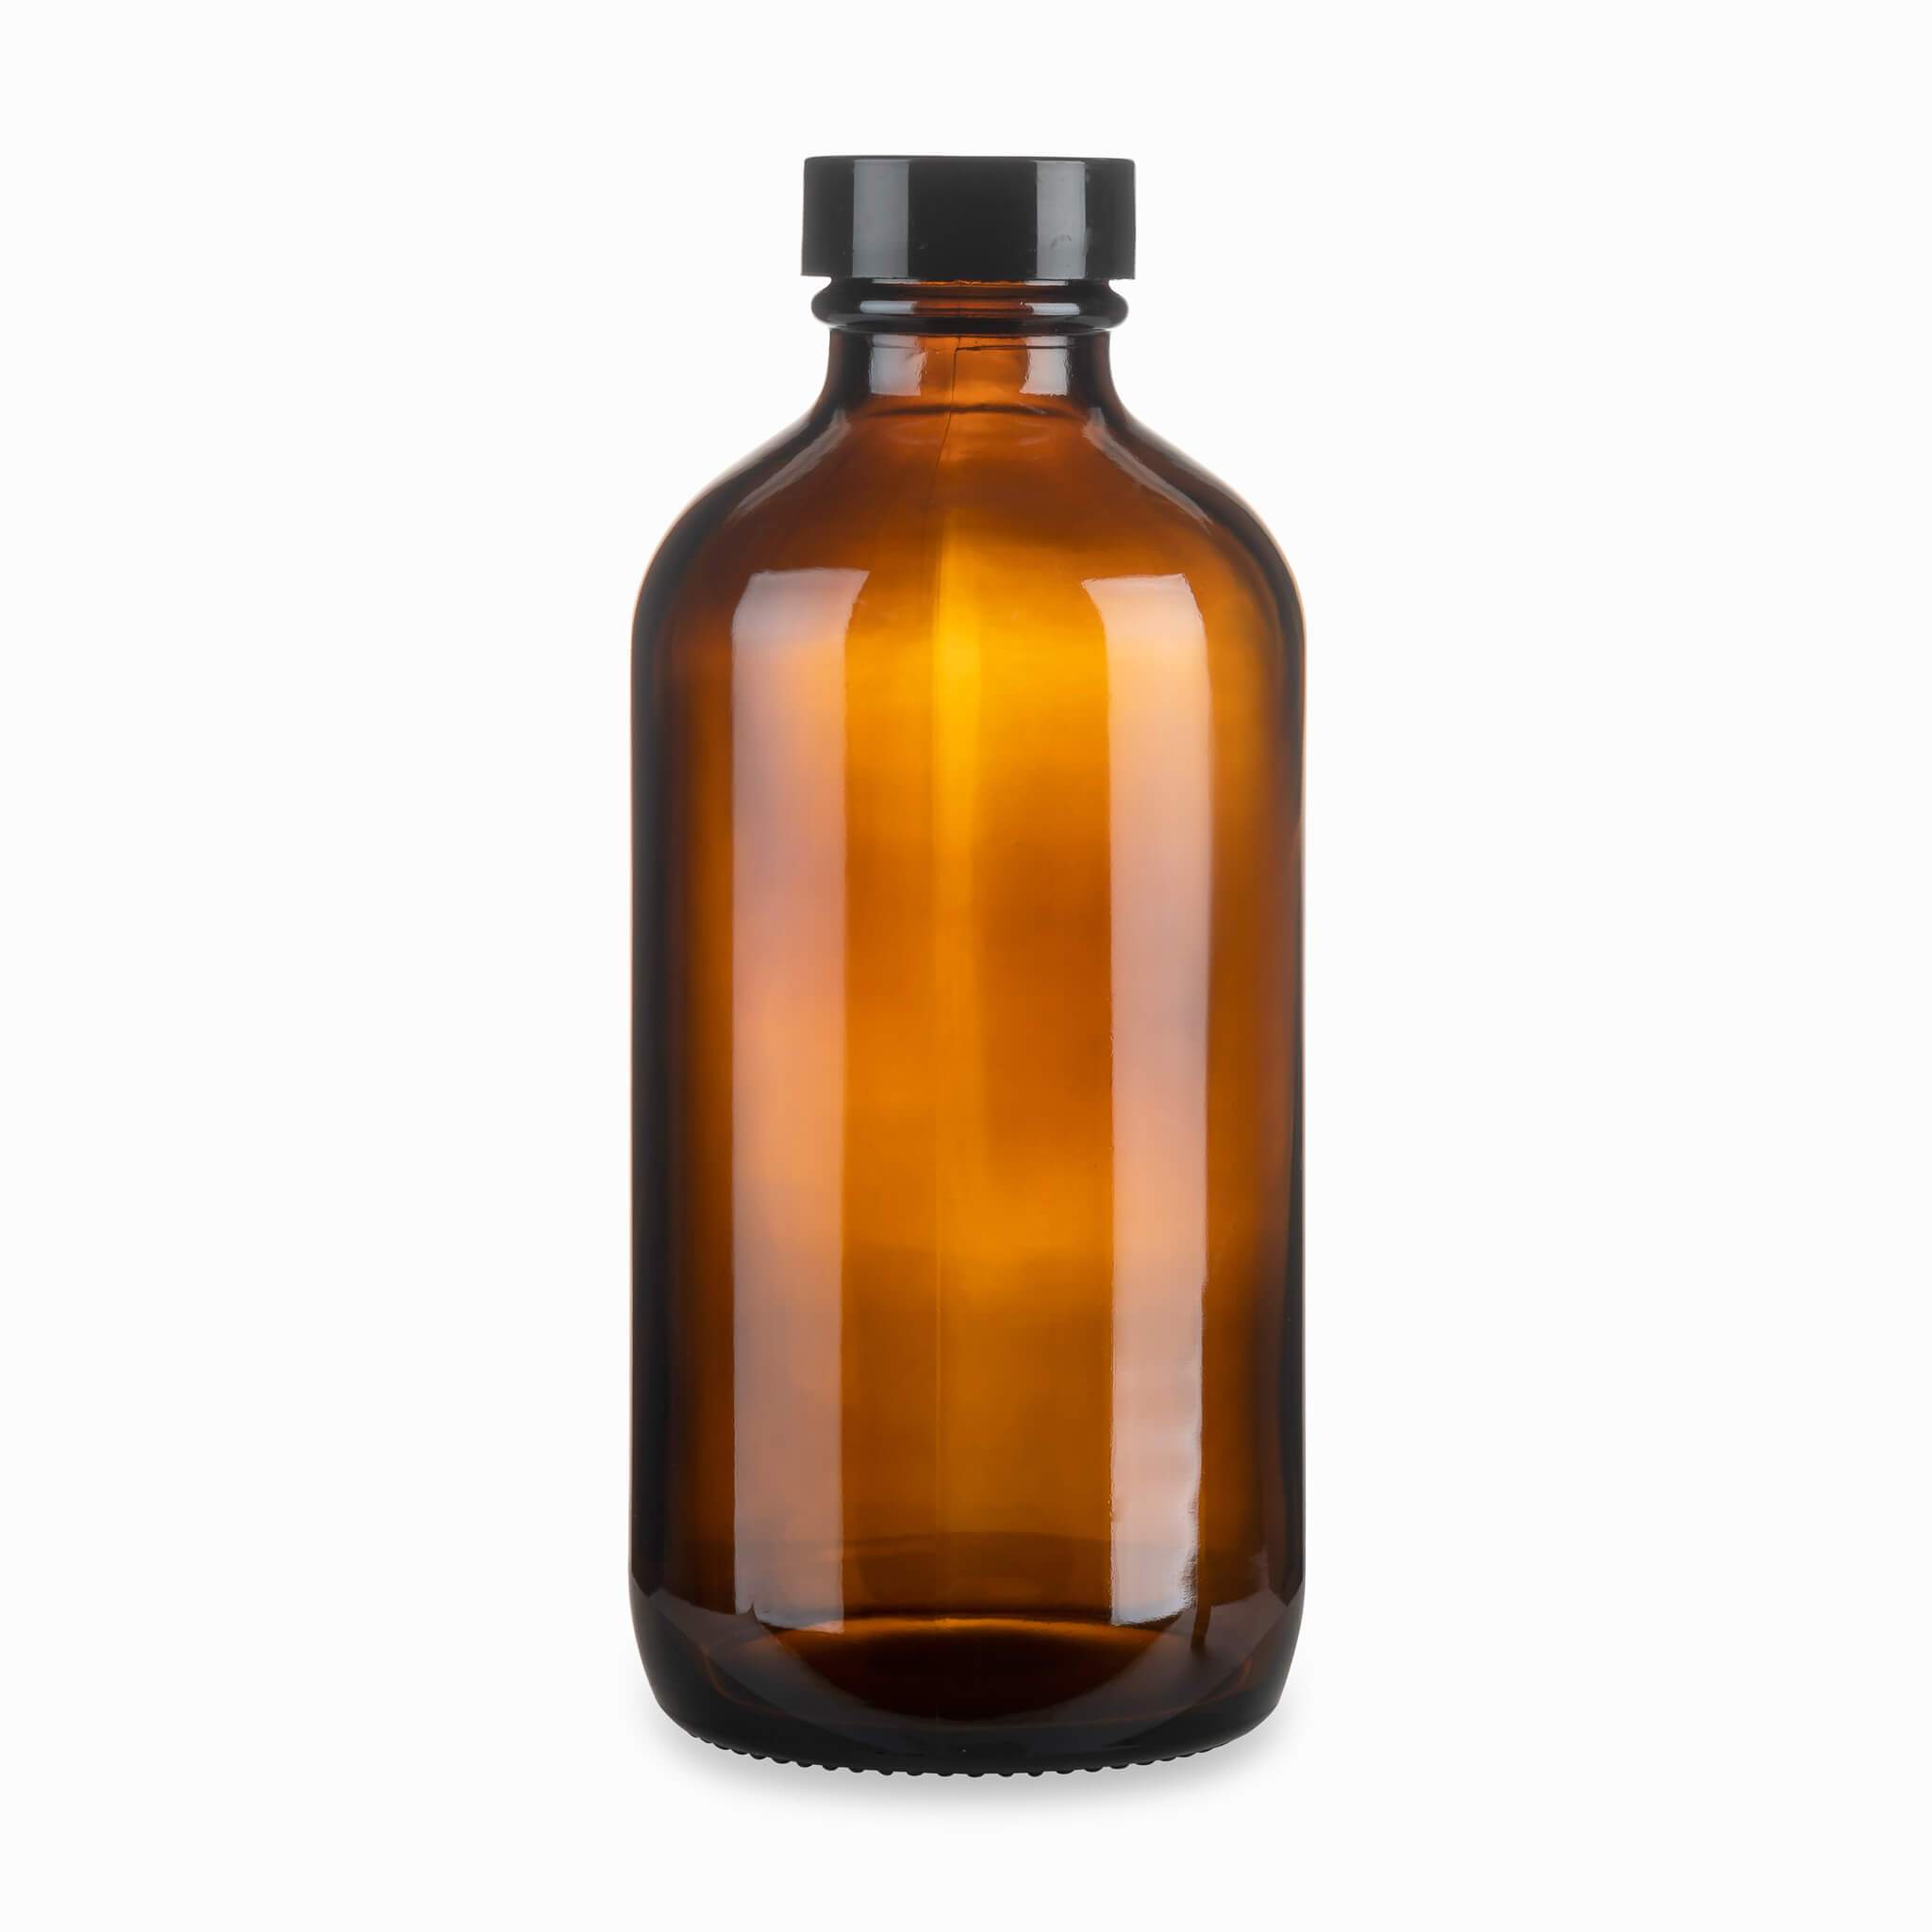 Amber Glass Bottle for Vanilla Extract, Boston Rounds tools Slofoodgroup 